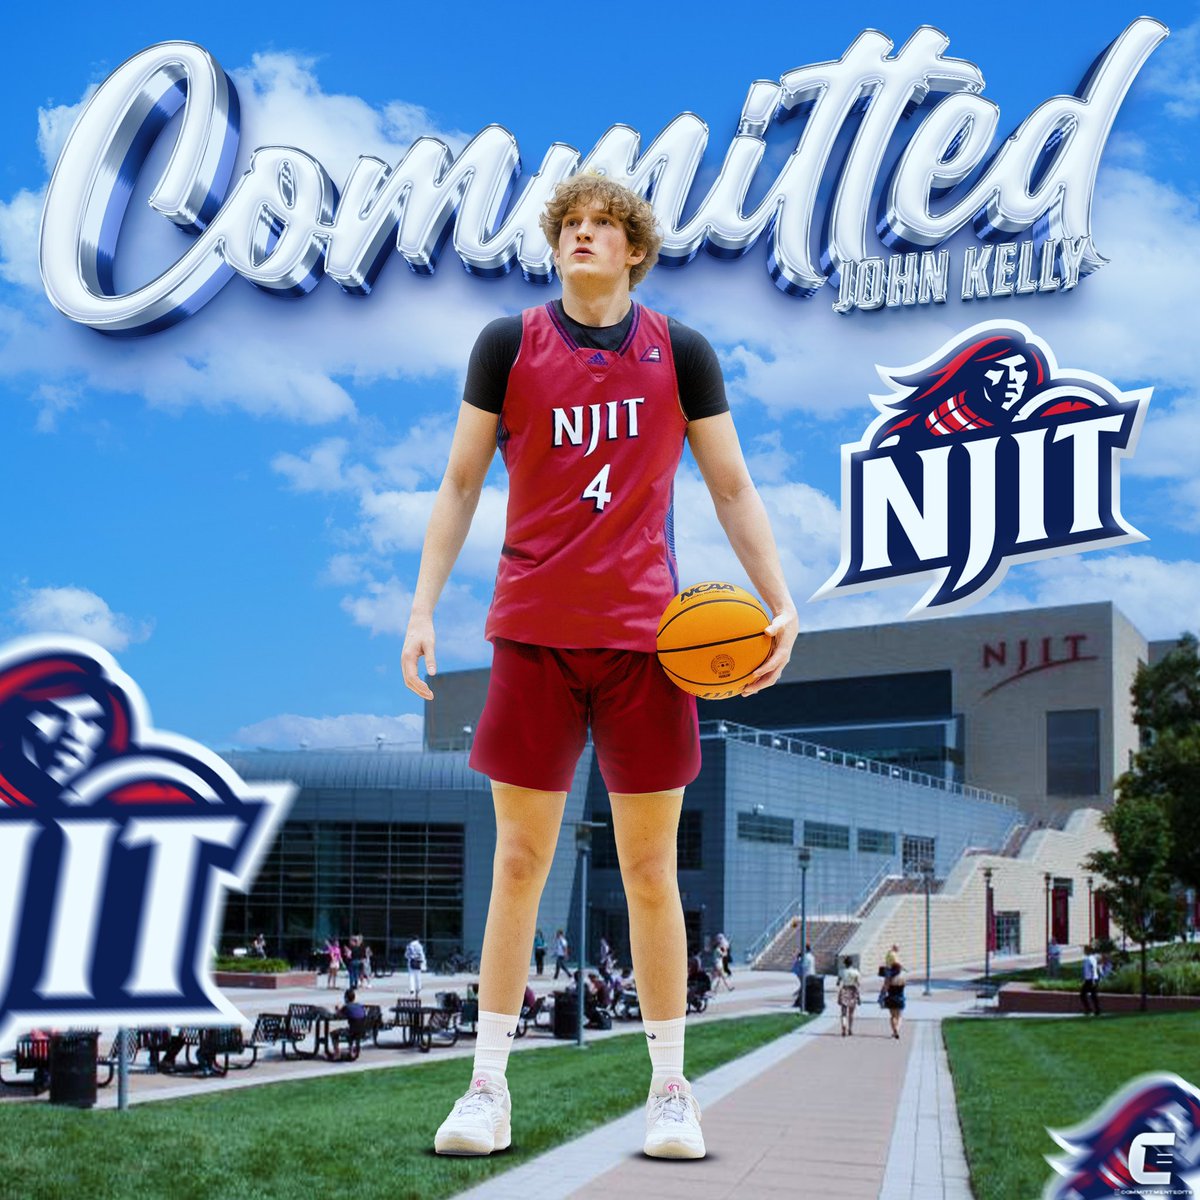 I am beyond blessed to announce that I will be furthering my academic and athletic career at NJIT. I would like to thank God, my family and all of my coaches for their endless support throughout this process. Lastly, I would like to thank the entire NJIT Coaching Staff. #Commited